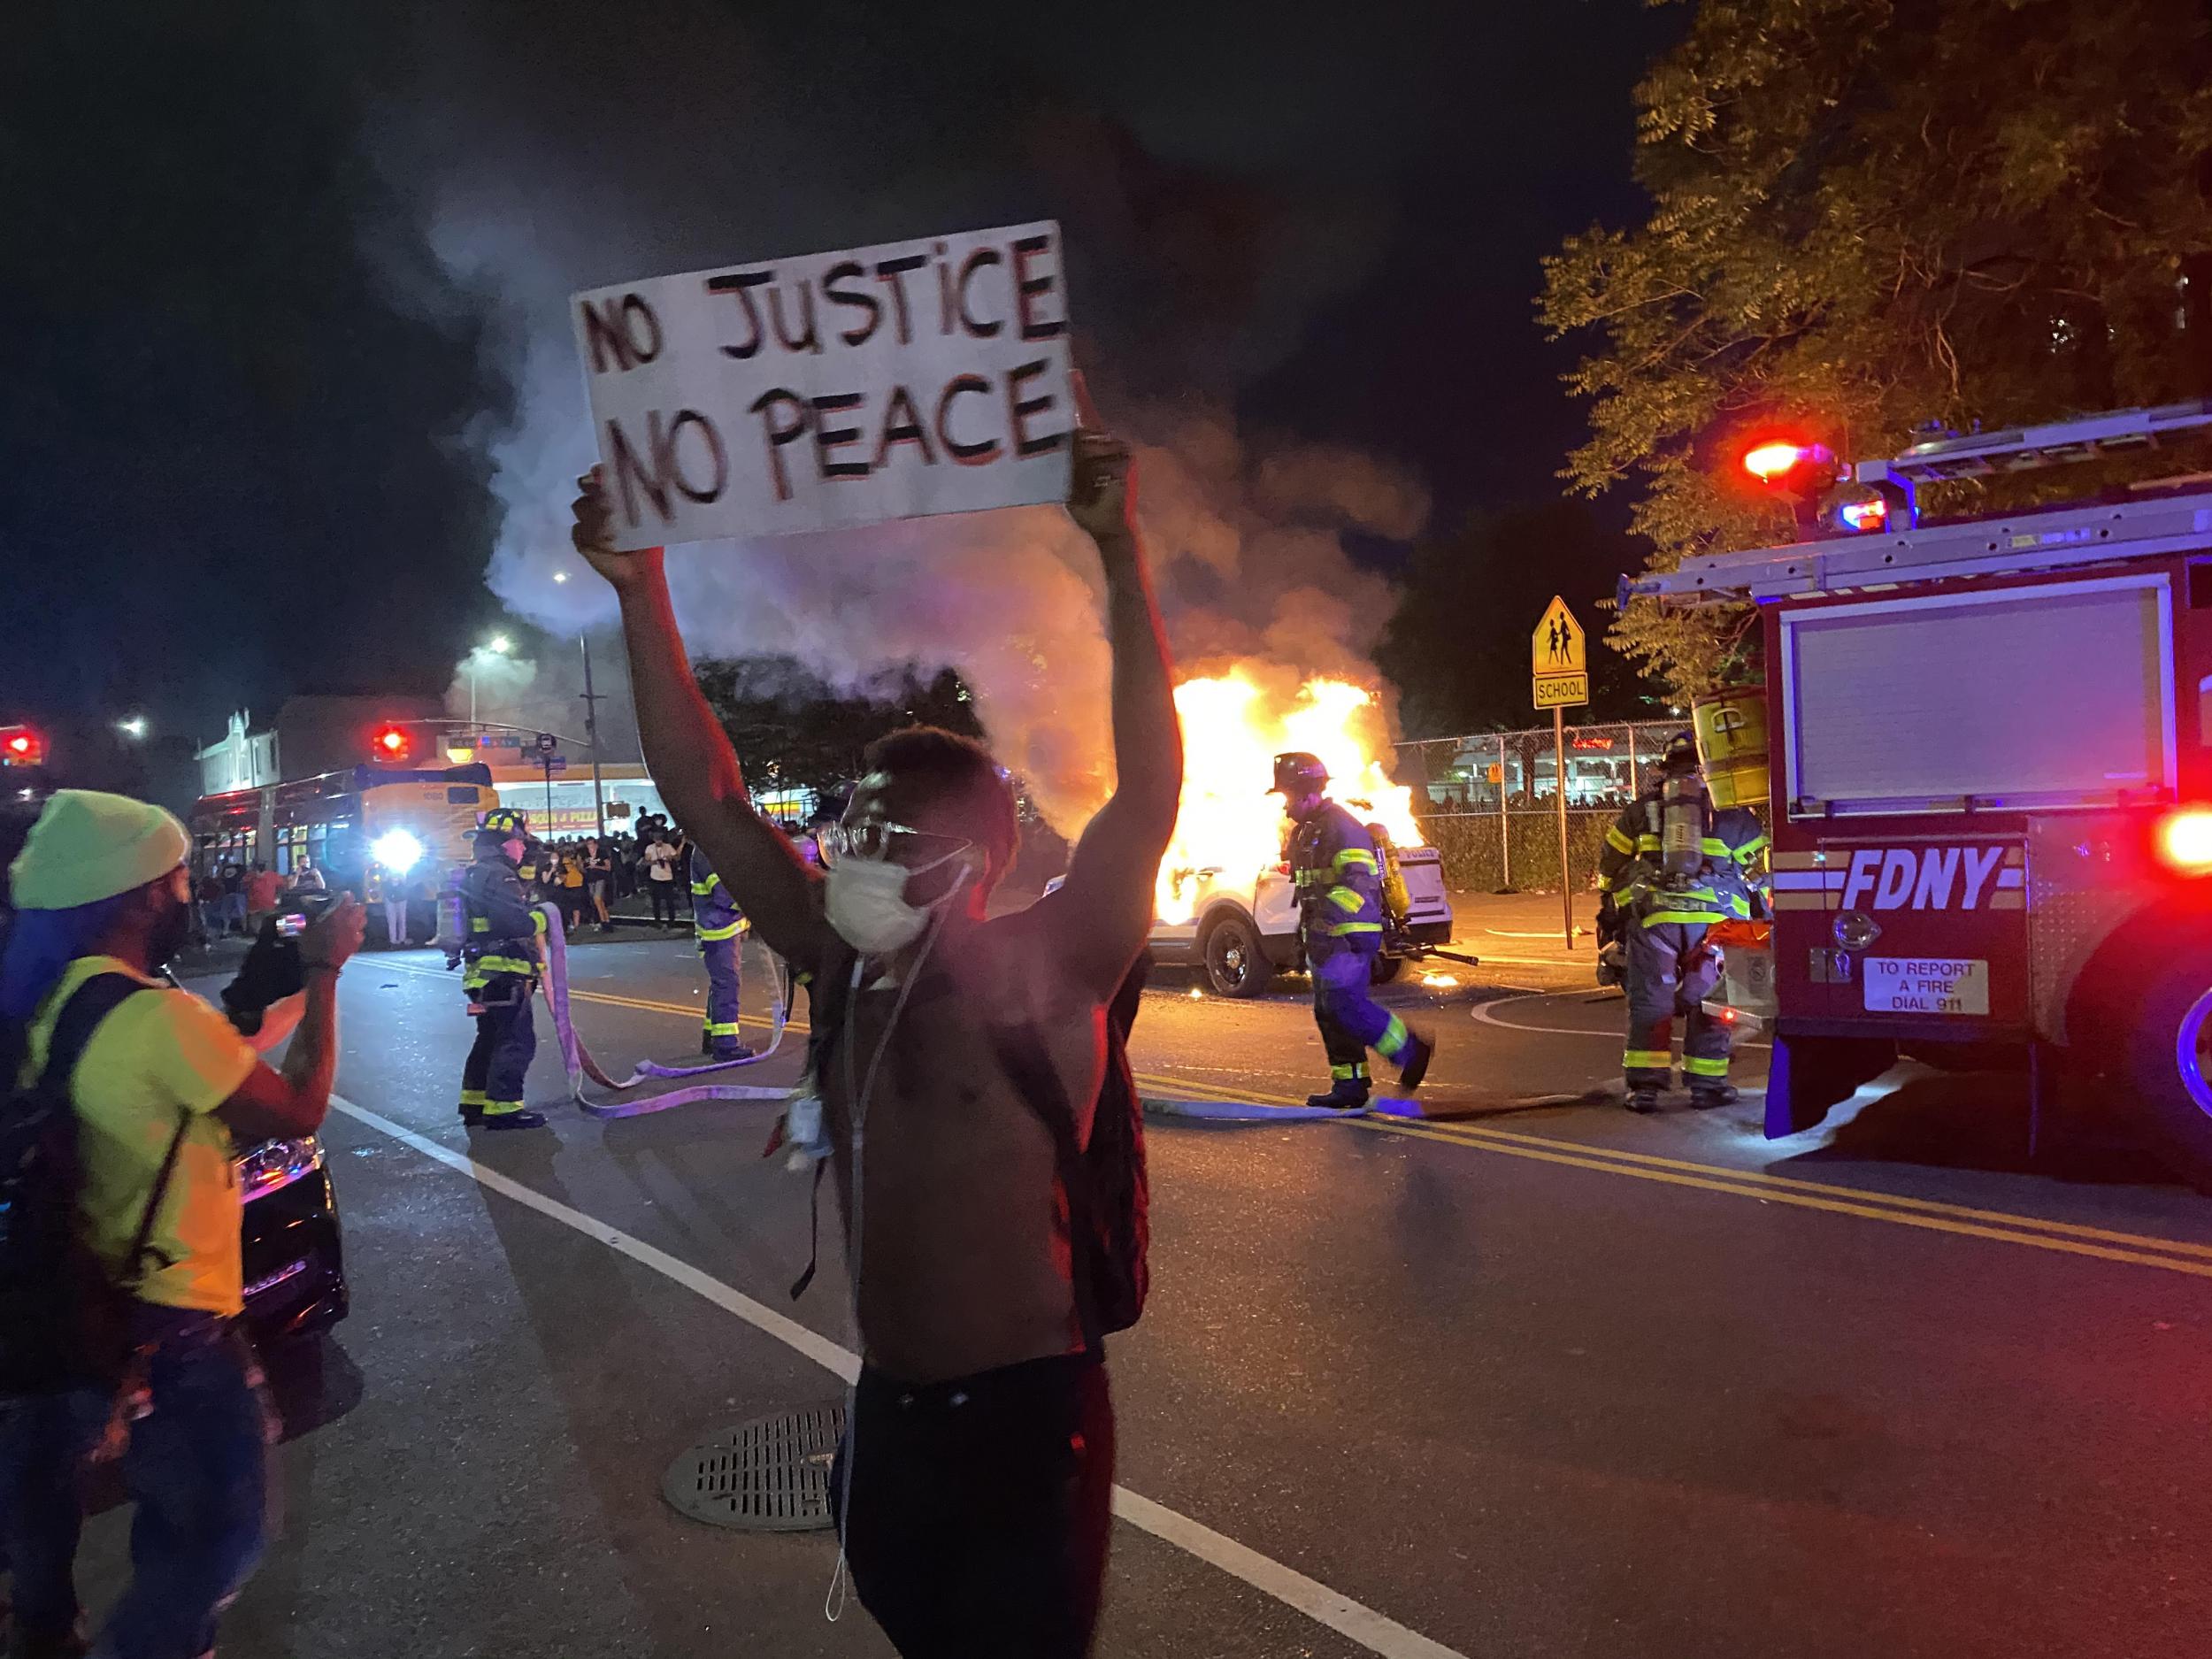 No justice, no peace: a protester stands in front of a burning police car in Brooklyn